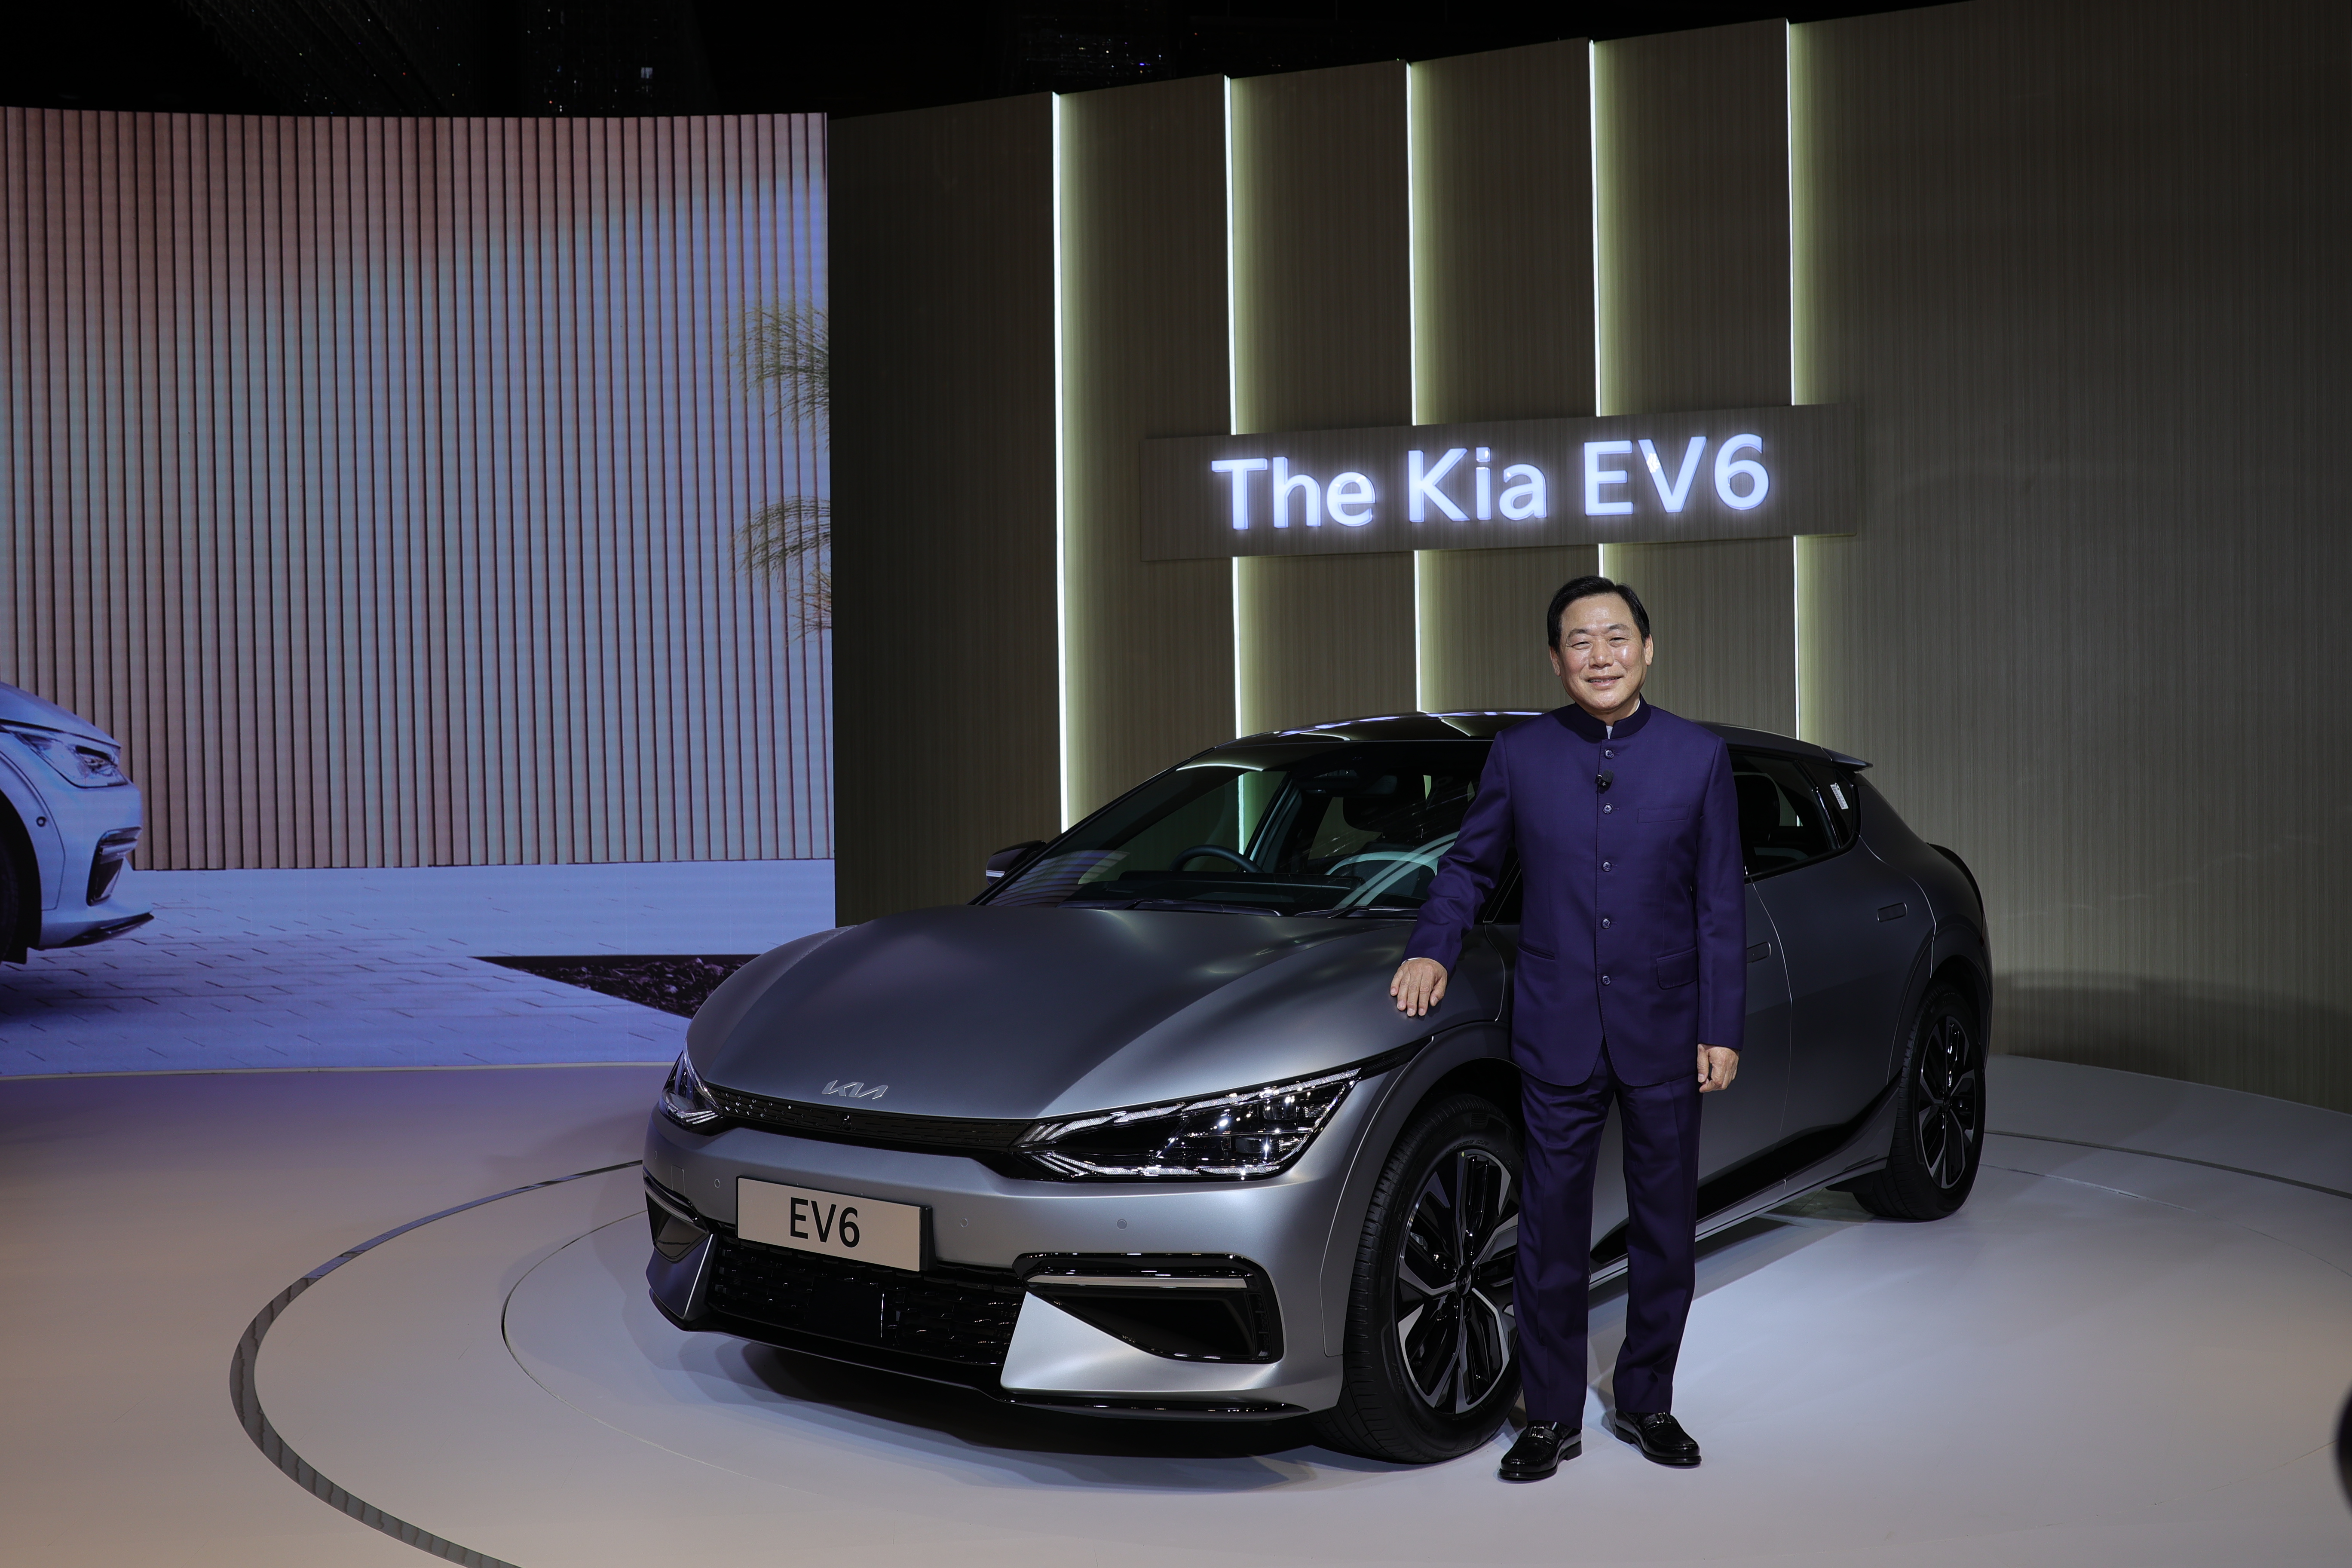 ‘Kia goes electric’ with the launch of EV6 in India starting at INR 59.95 Lakhs; commits an India specific RV based EV in 2025